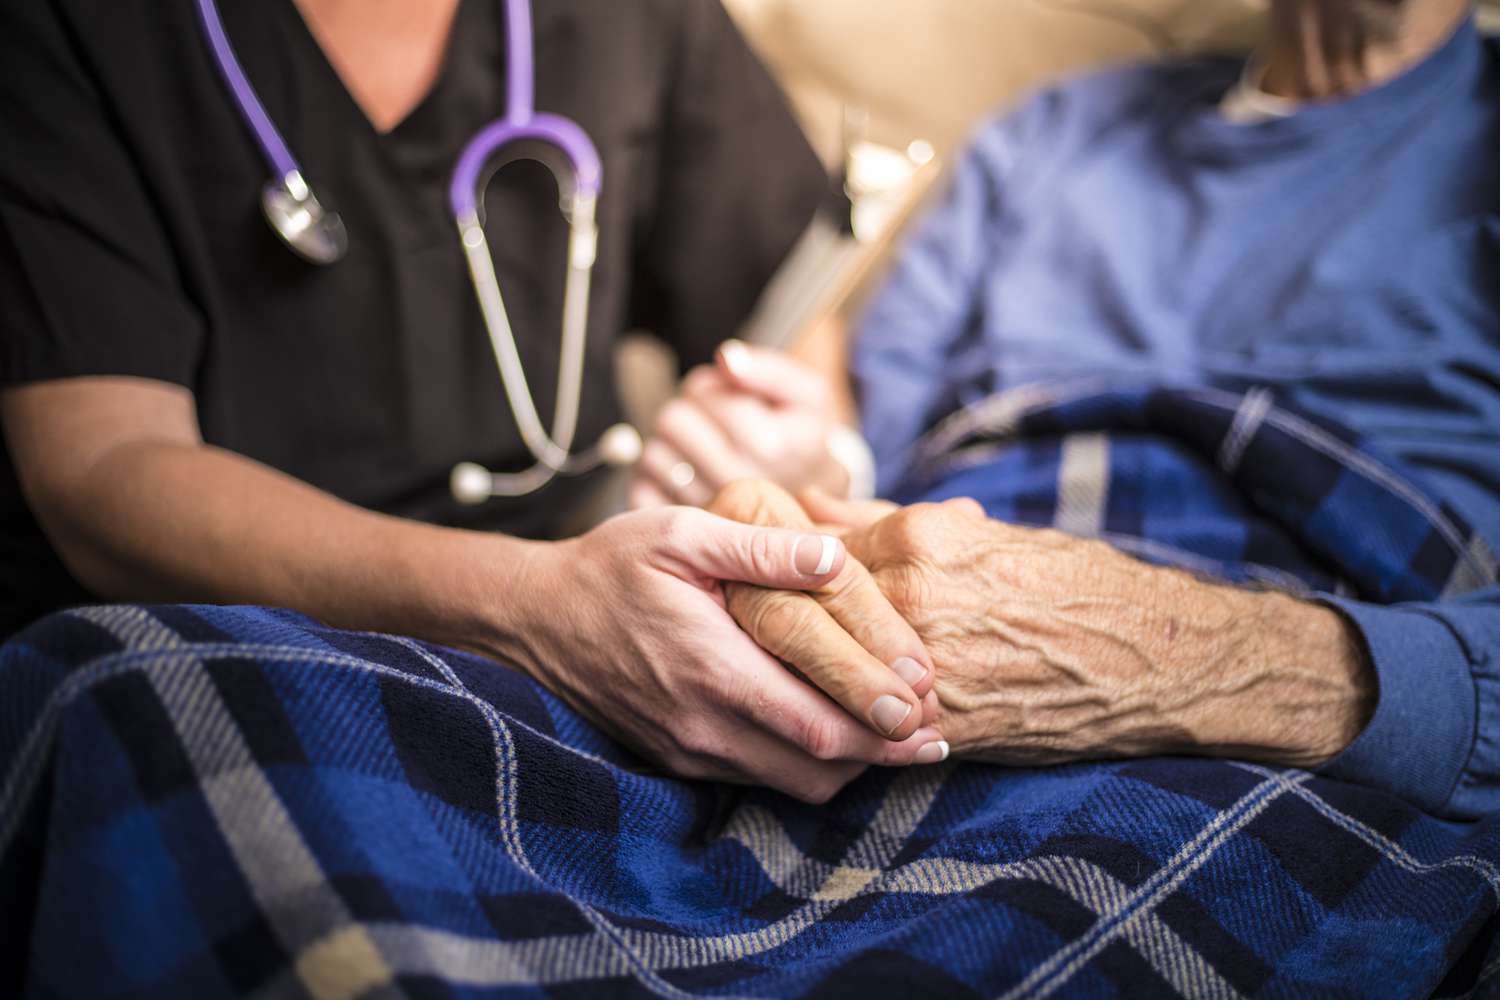 How does Comfort Care Hospice prioritize patient comfort?